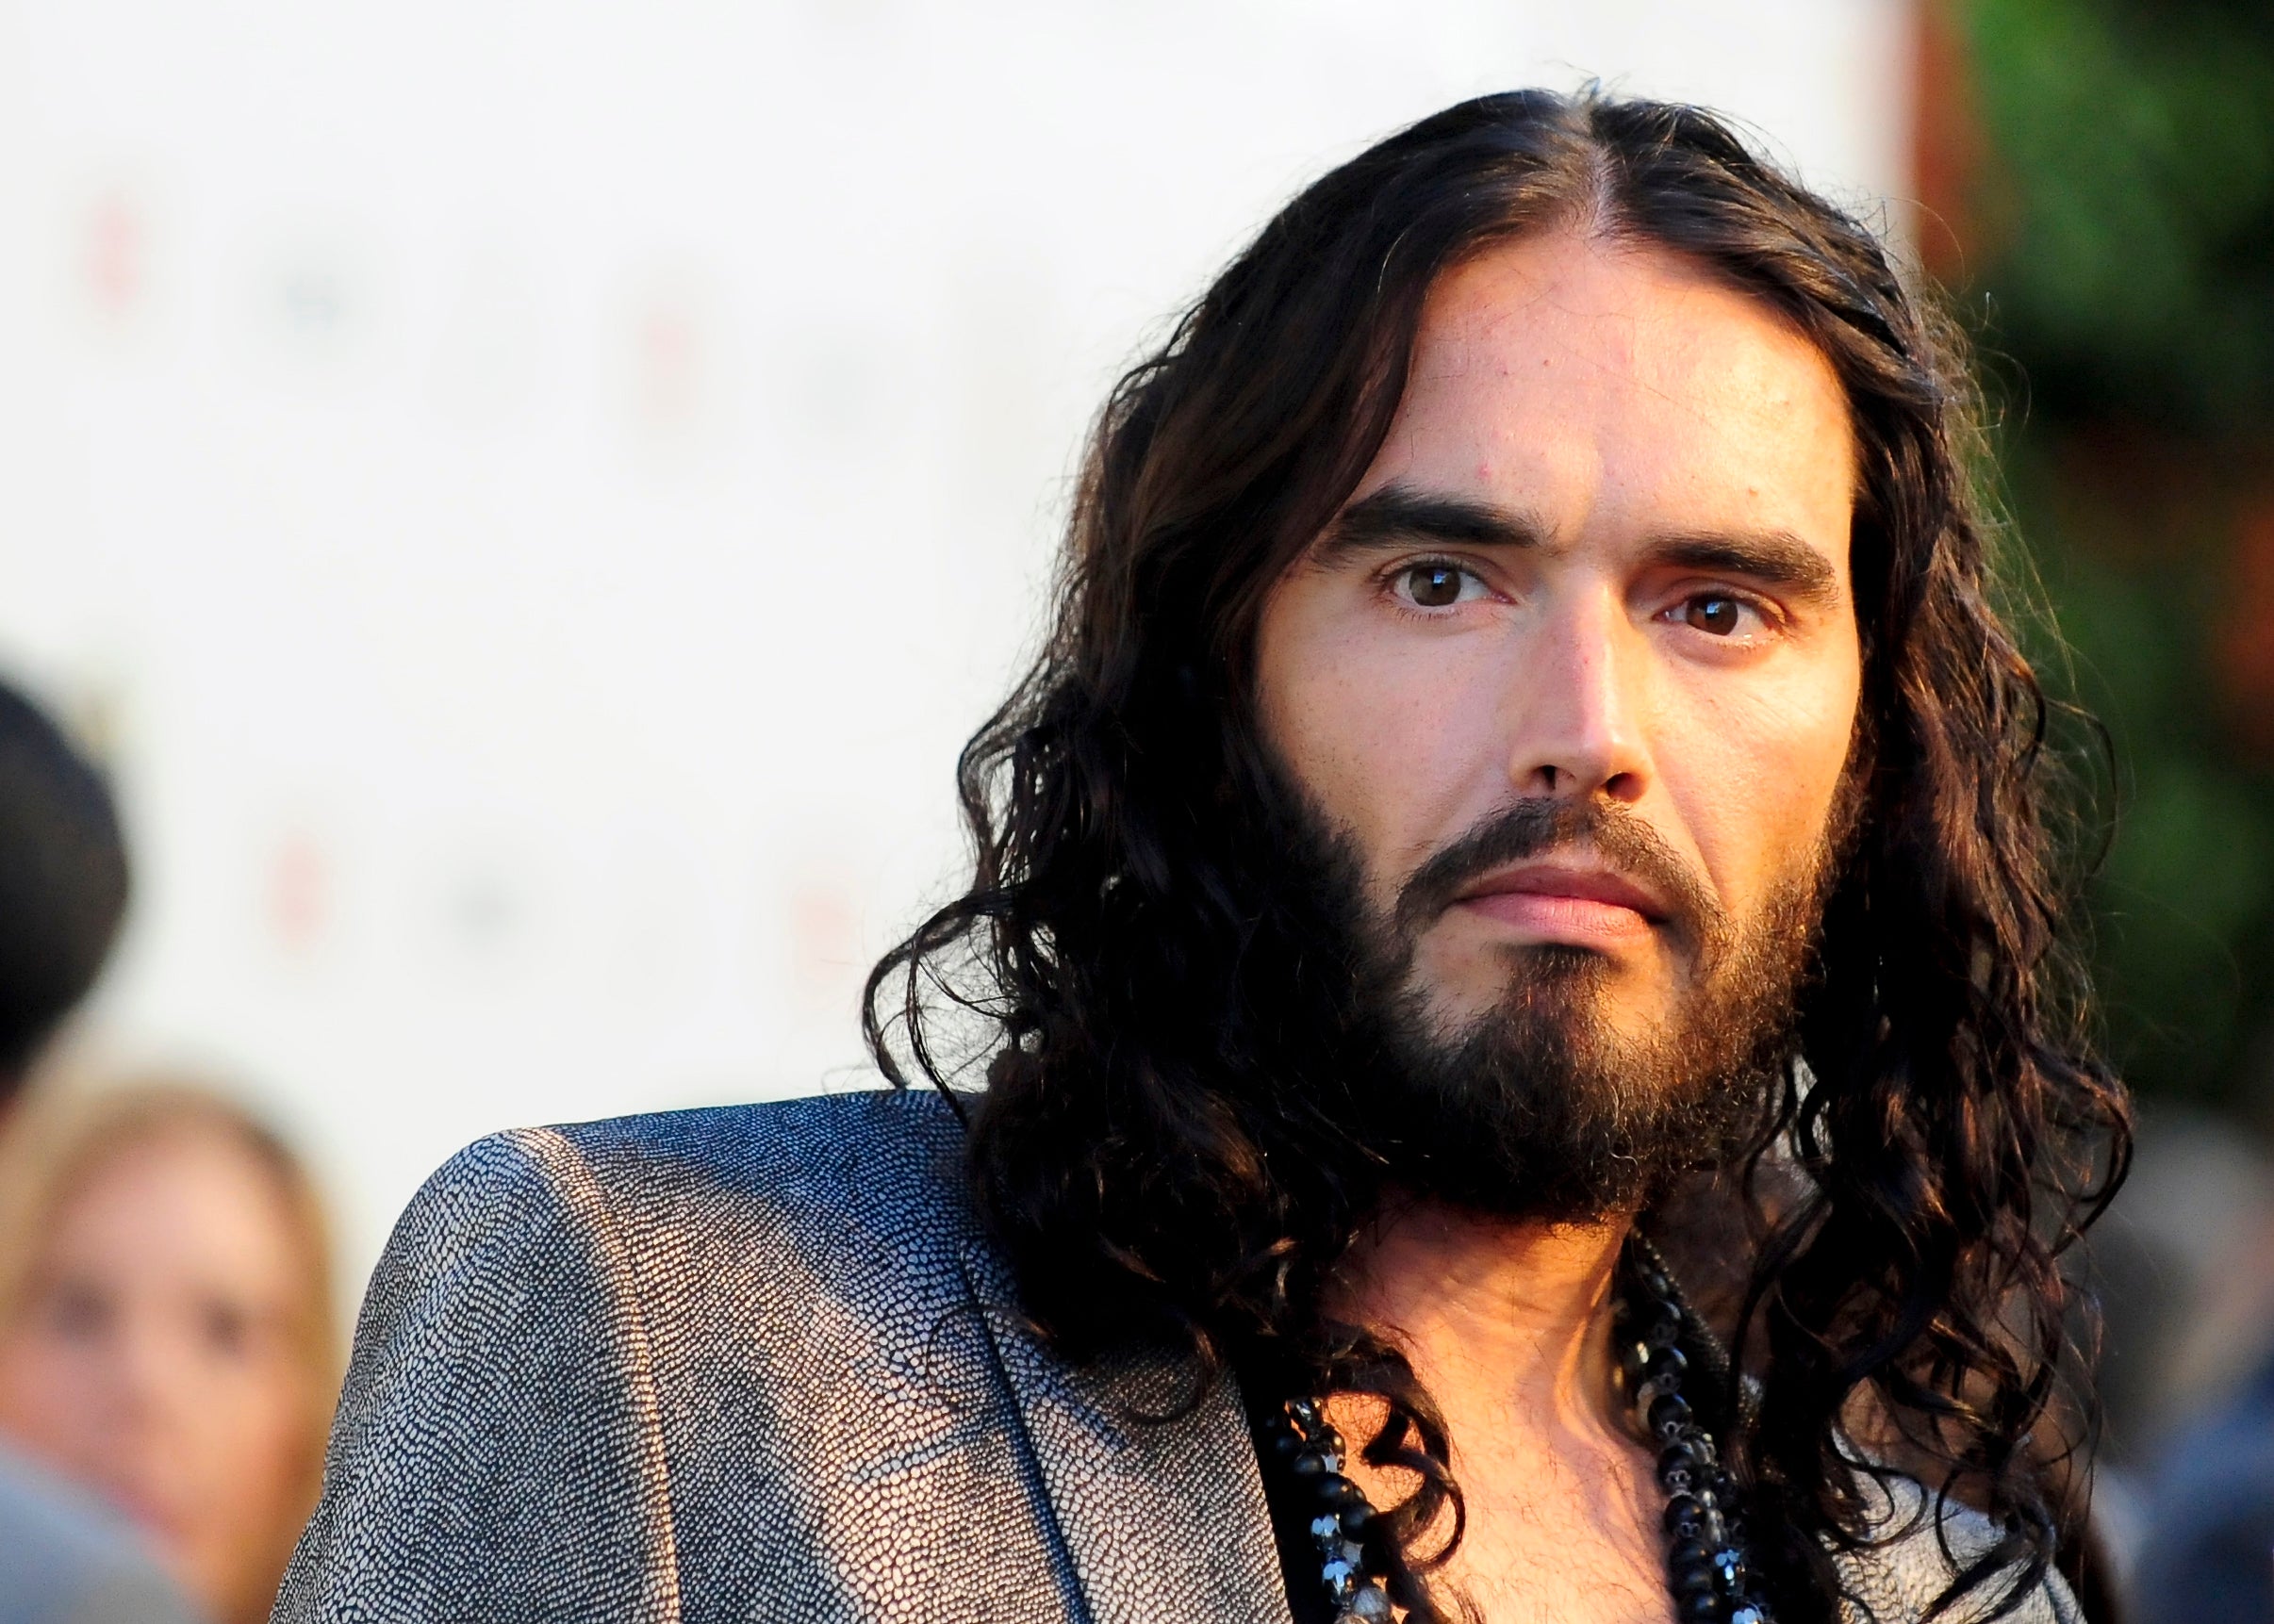 Russell Brand has staged a second attack on Fox News' Sean Hannity